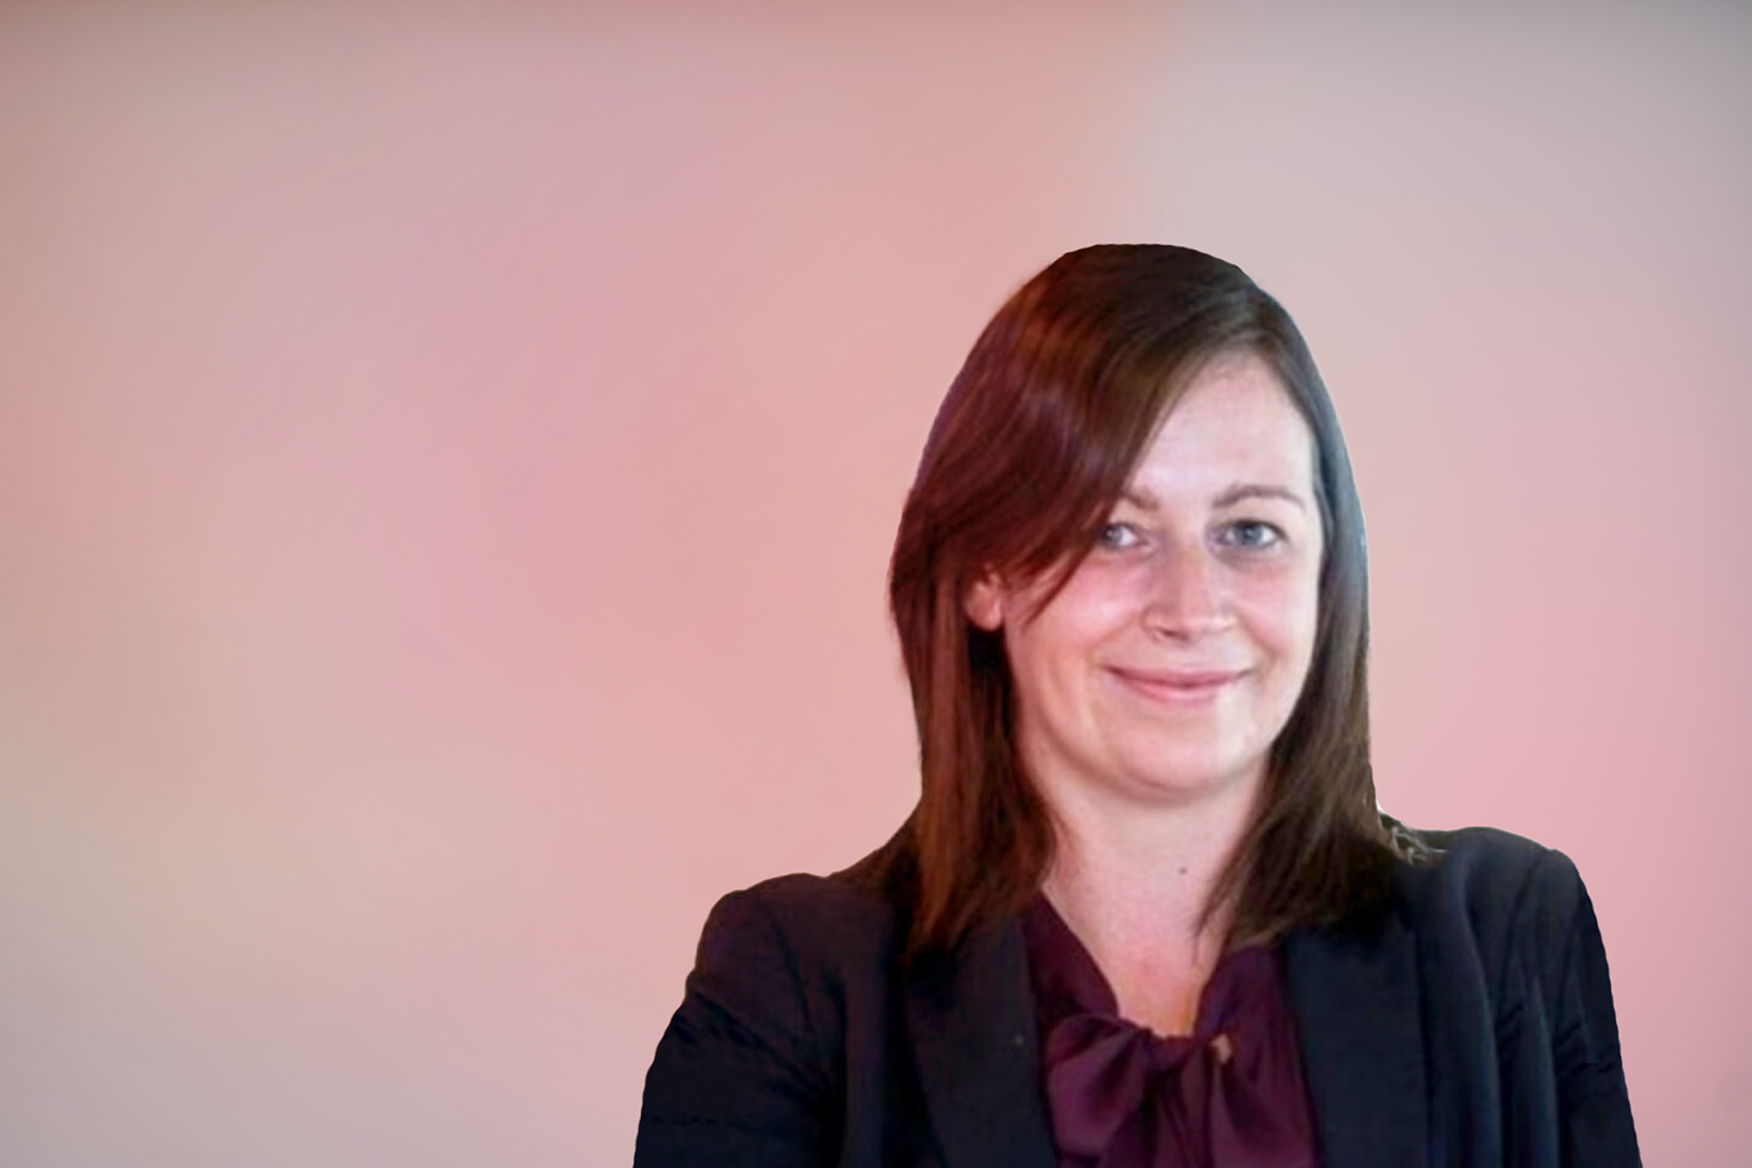 Nucleus appoints Julia Peake to further strengthen its Technical Services team